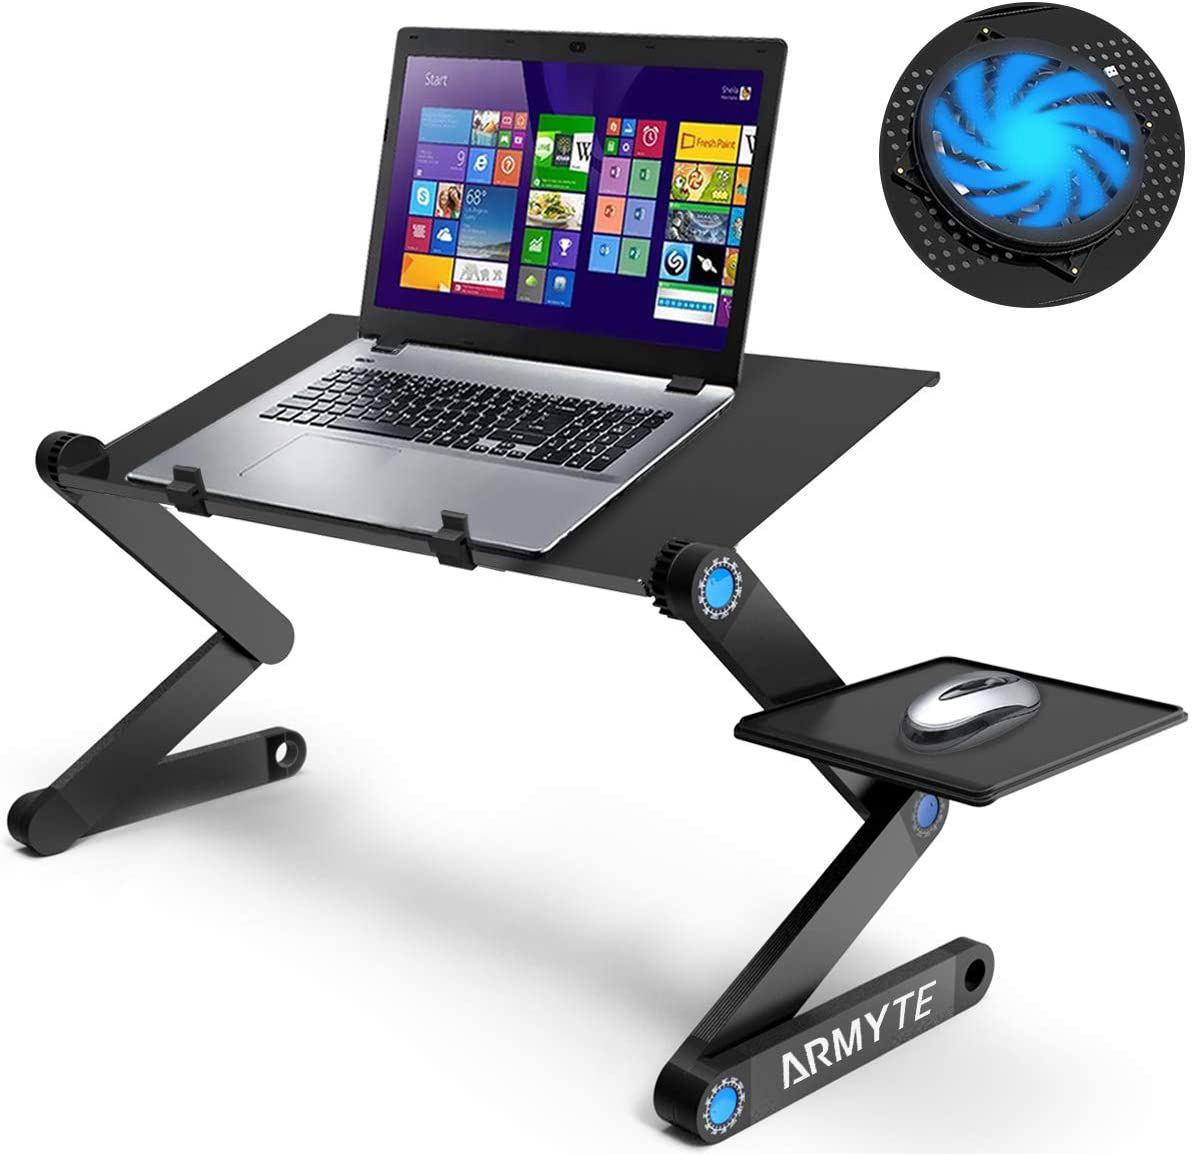 Extra Wide Adjustable Laptop Stand With Cooling Fan & Mouse Pad For 17 Intended For Green Adjustable Laptop Desks (View 8 of 15)